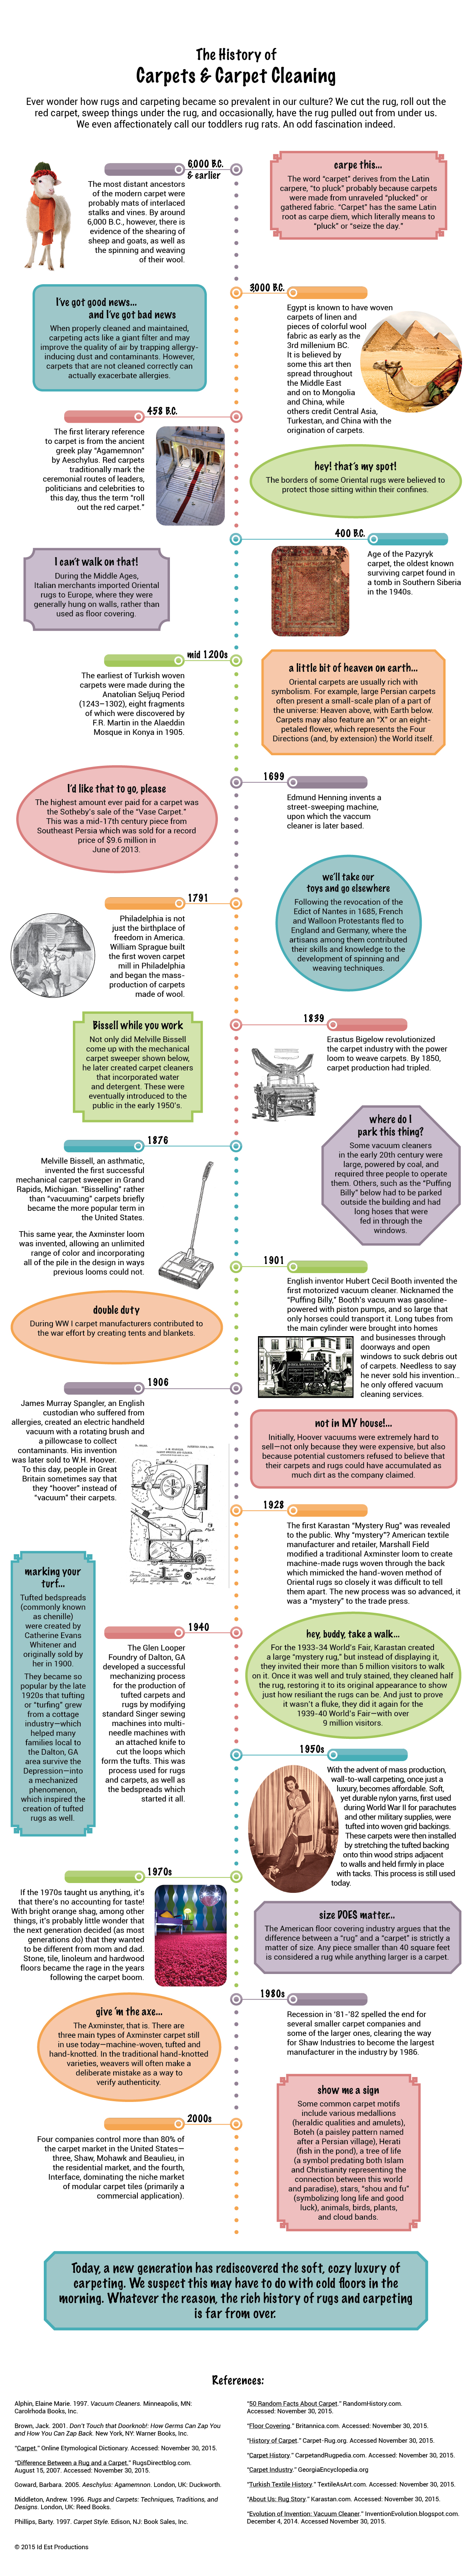 Infographic - History of Carpet and Rugs